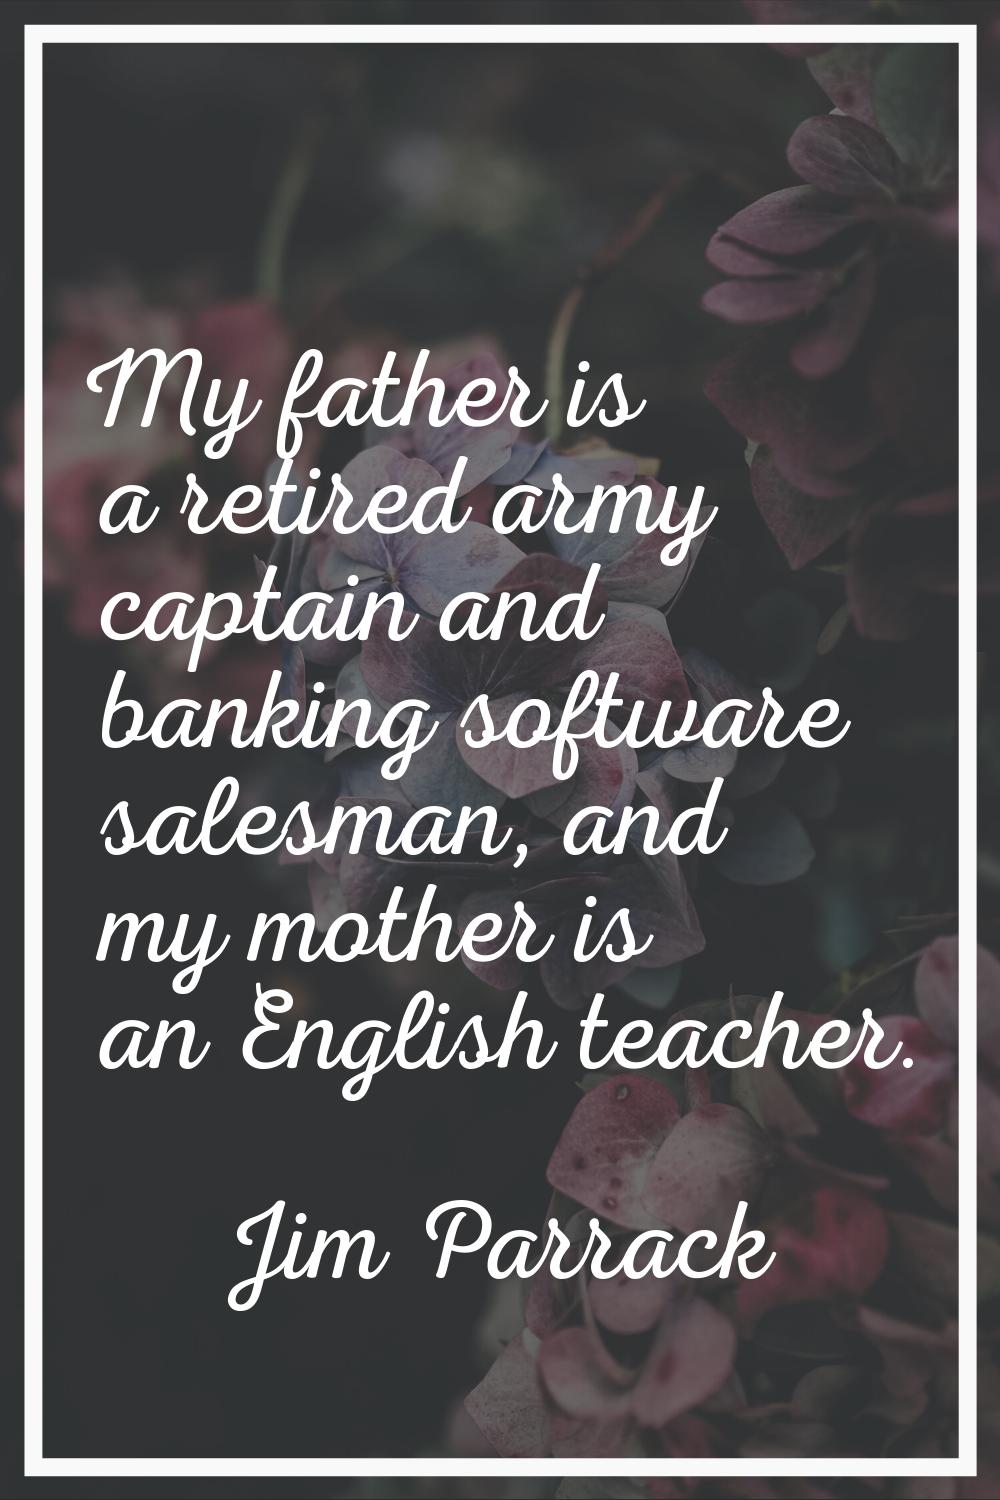 My father is a retired army captain and banking software salesman, and my mother is an English teac